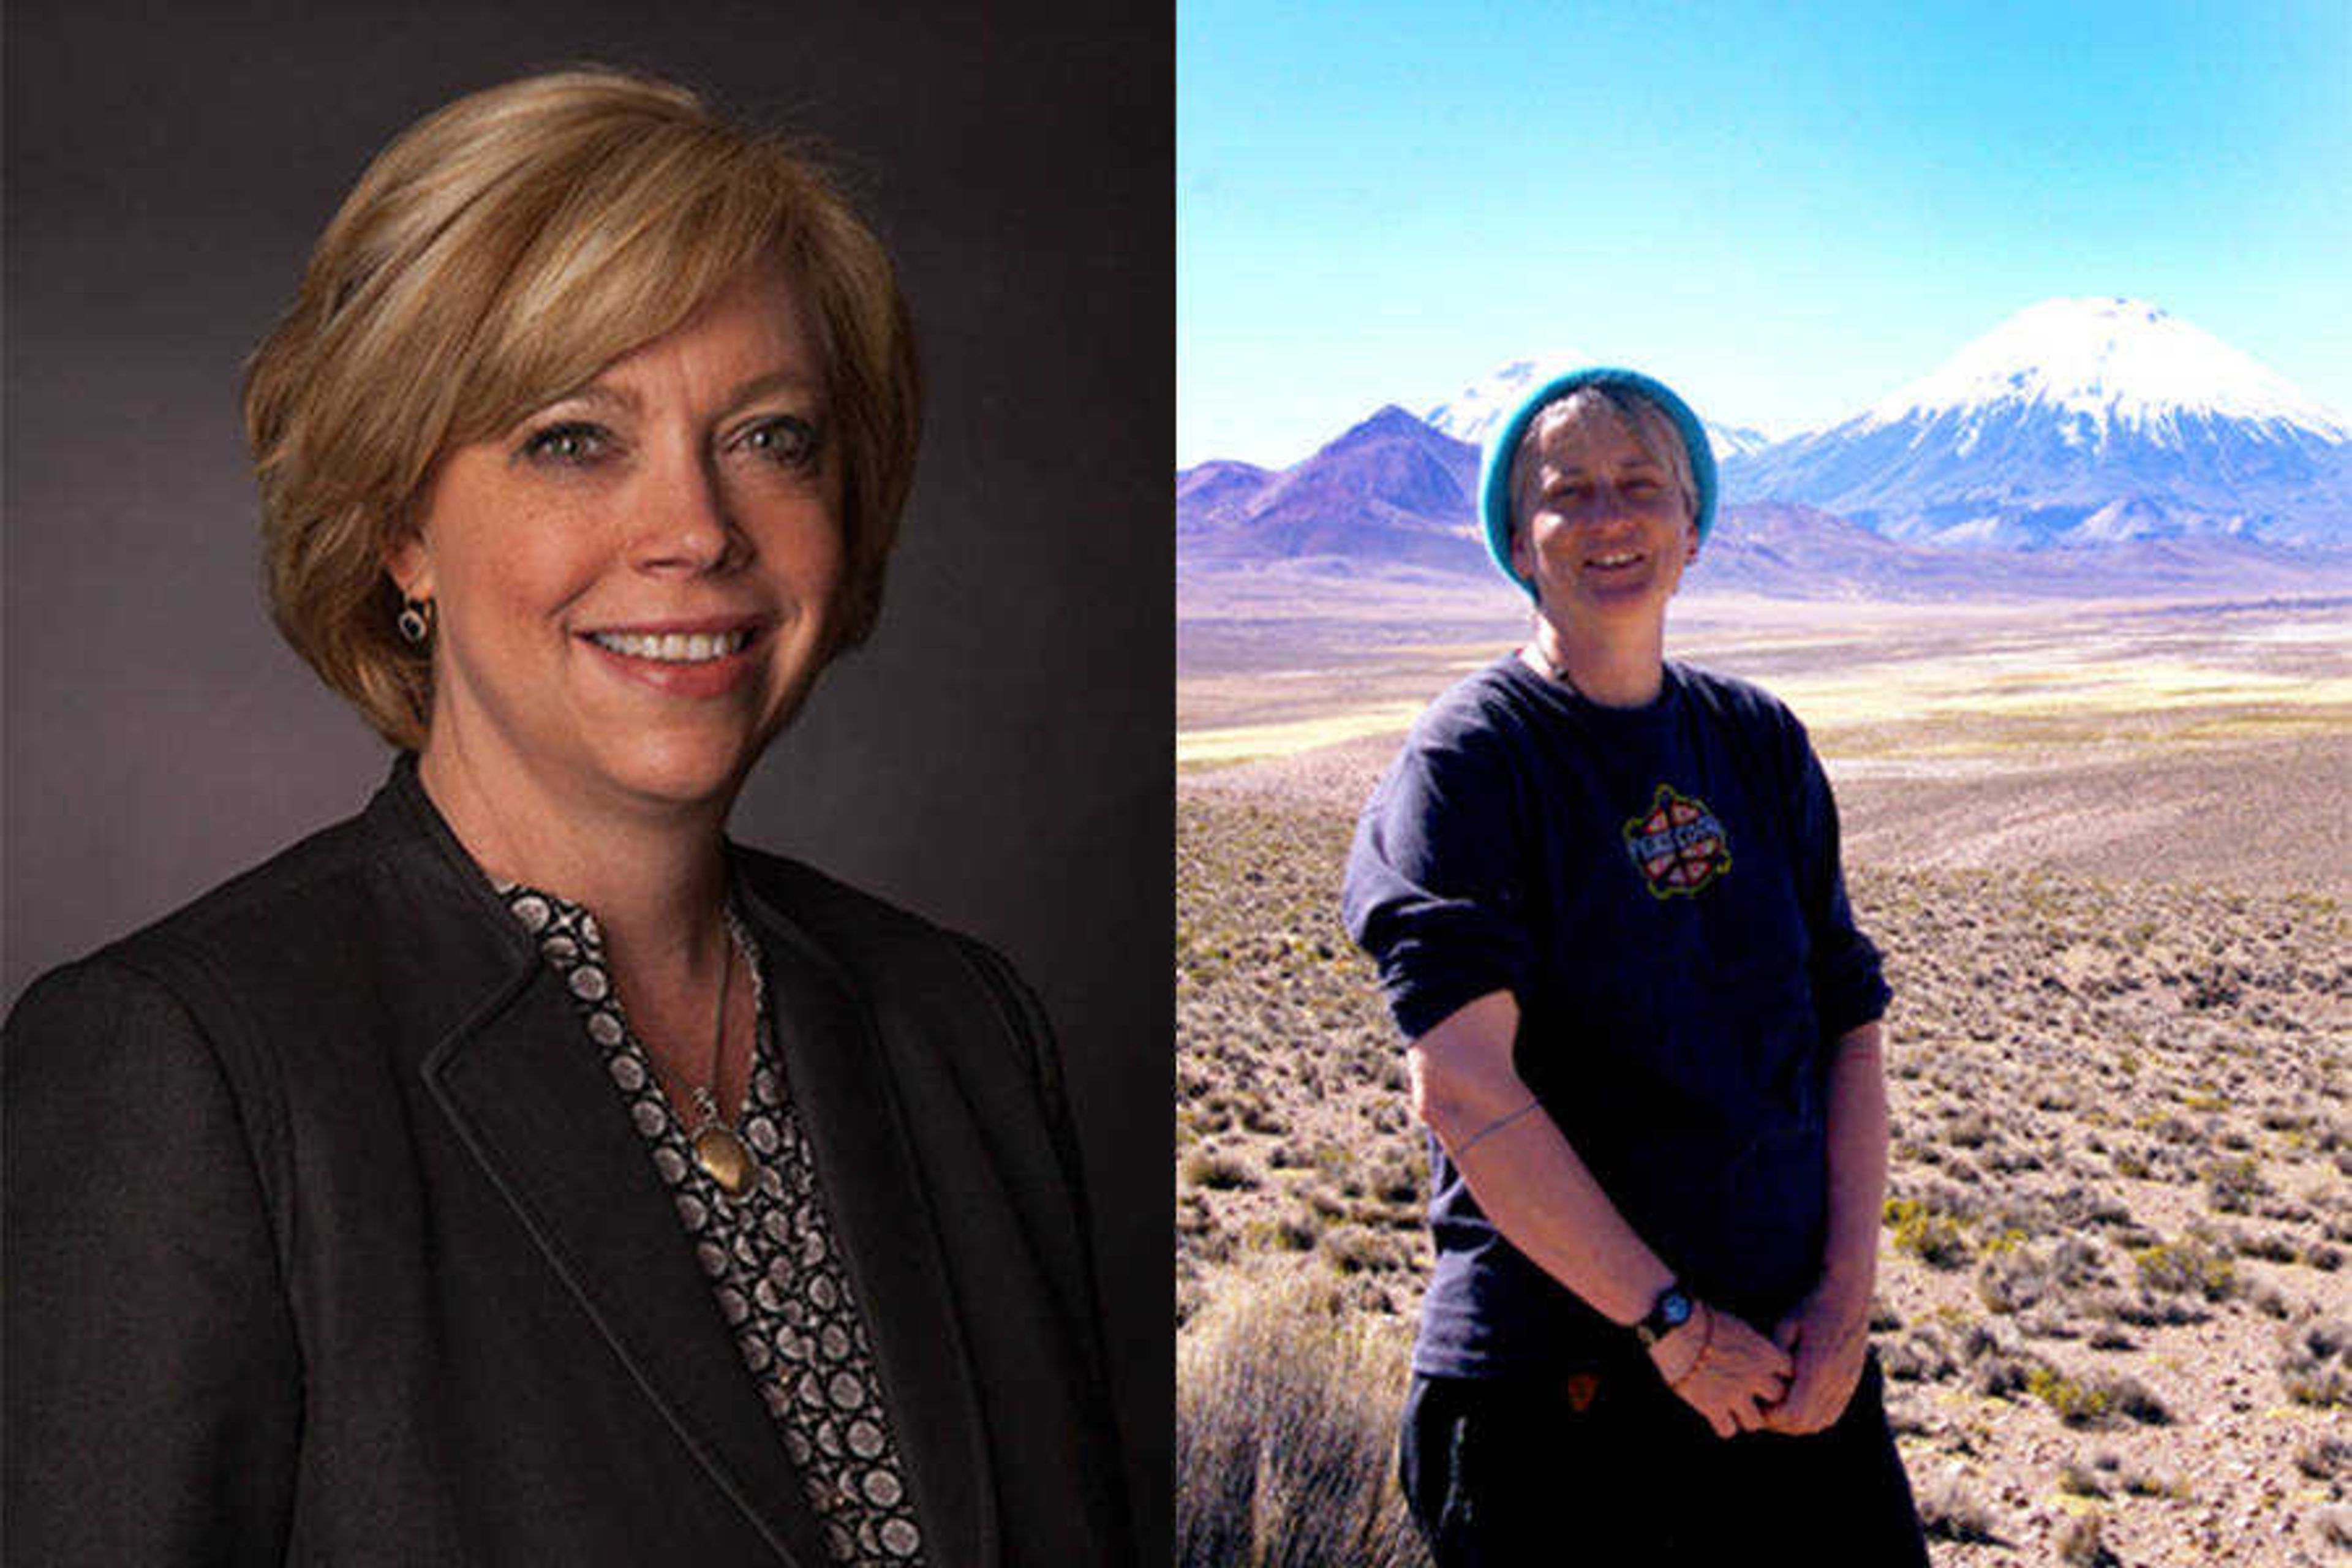 Deborah Below - Vice President for Enrollment Management and Student Success (left). Diane Wood - Professor of Biology, Faculty Senate chairperson. (right).
